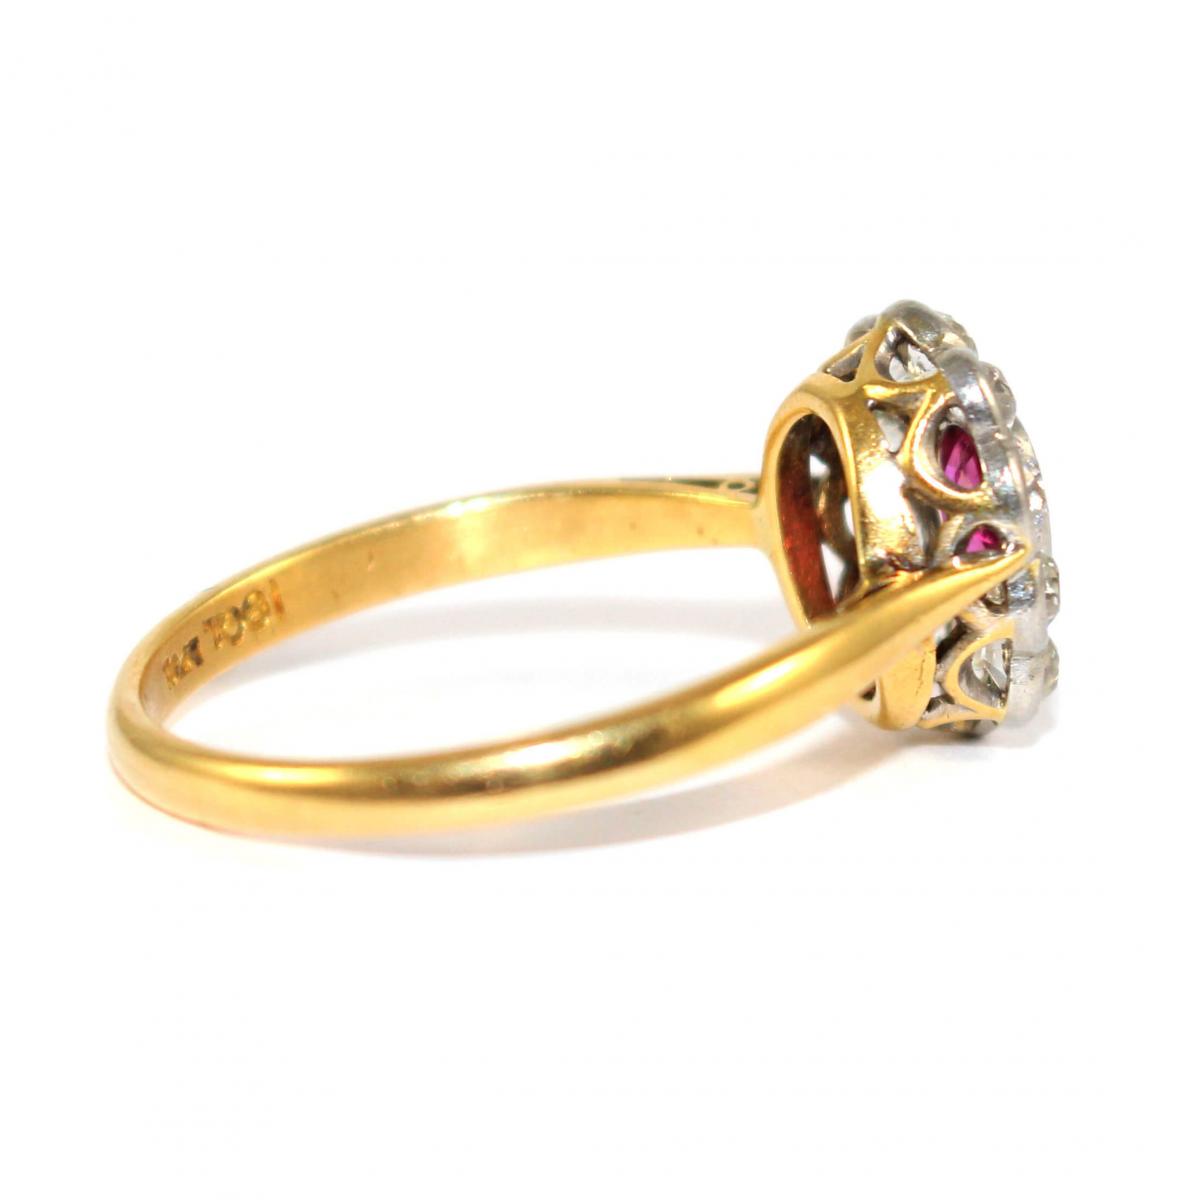 Edwardian Pink Sapphire Oval Cluster Ring c.1925